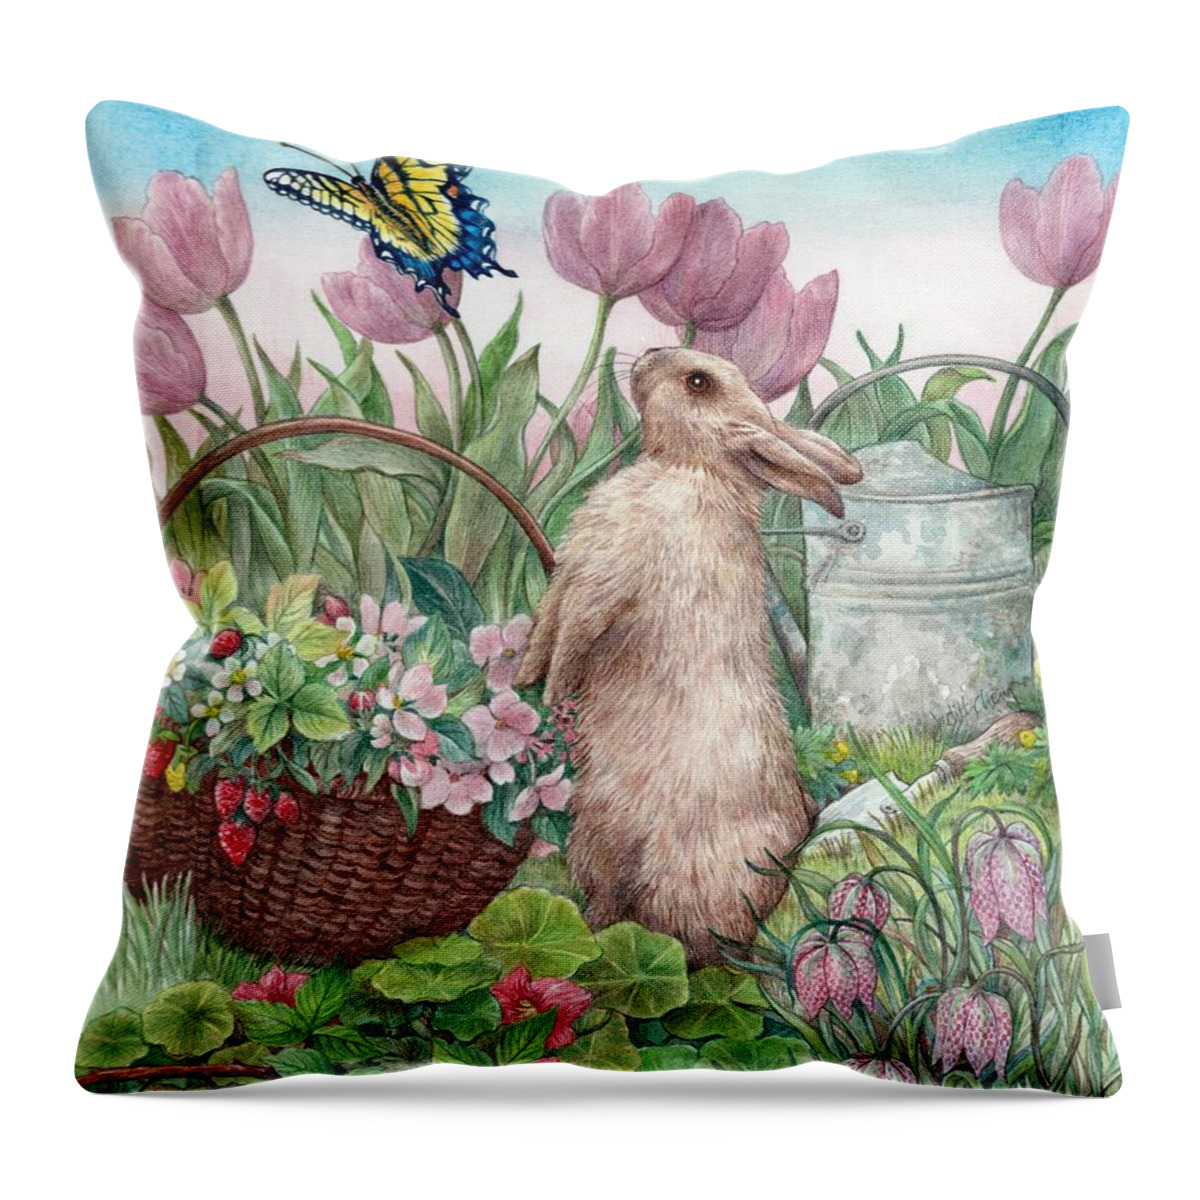 Illustrated Bunny Throw Pillow featuring the painting Bunny in Spring Garden by Judith Cheng